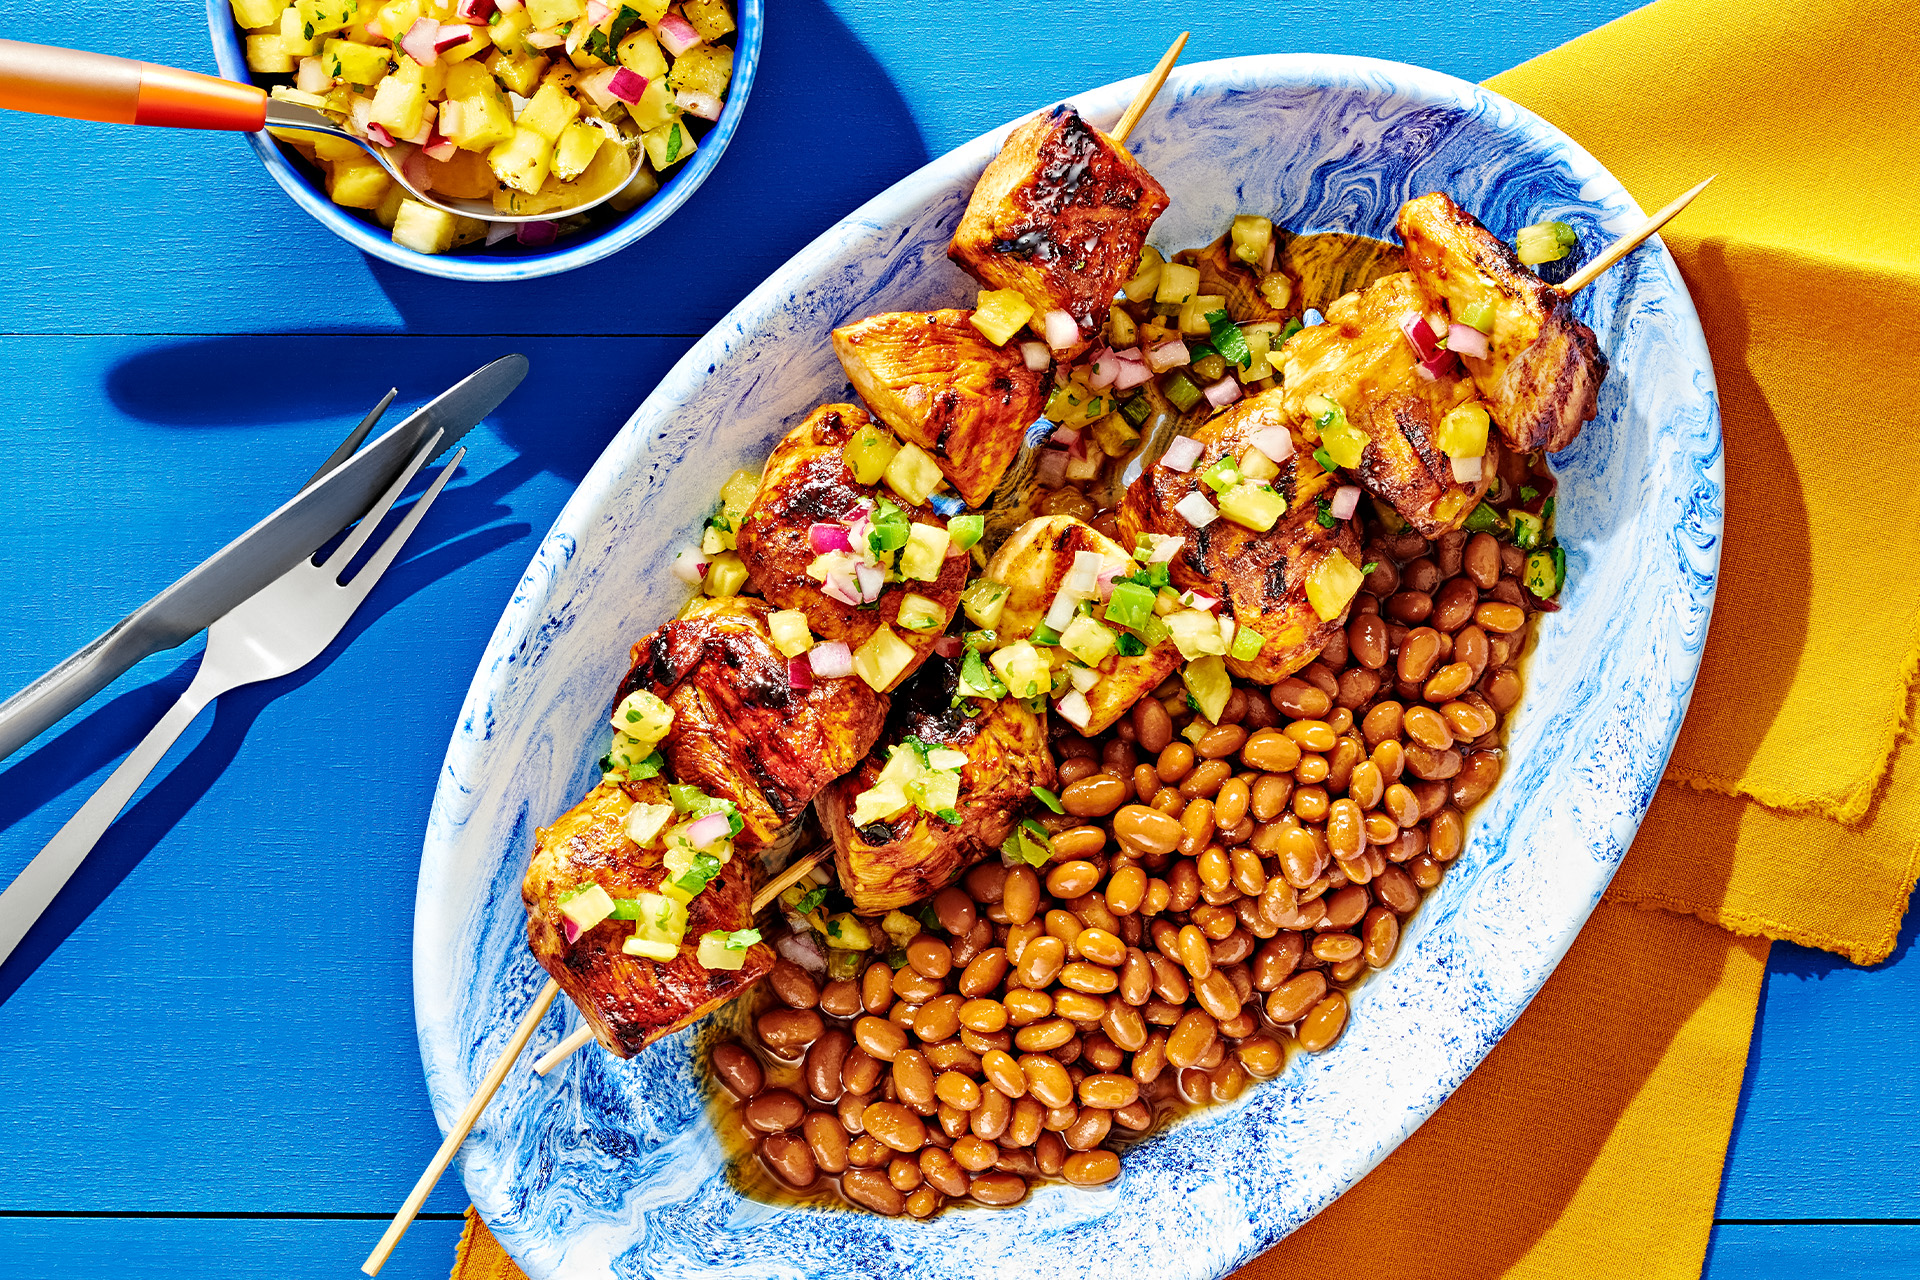 Grilled chicken skewers and baked beans on an oval blue and white swirl pattern plate